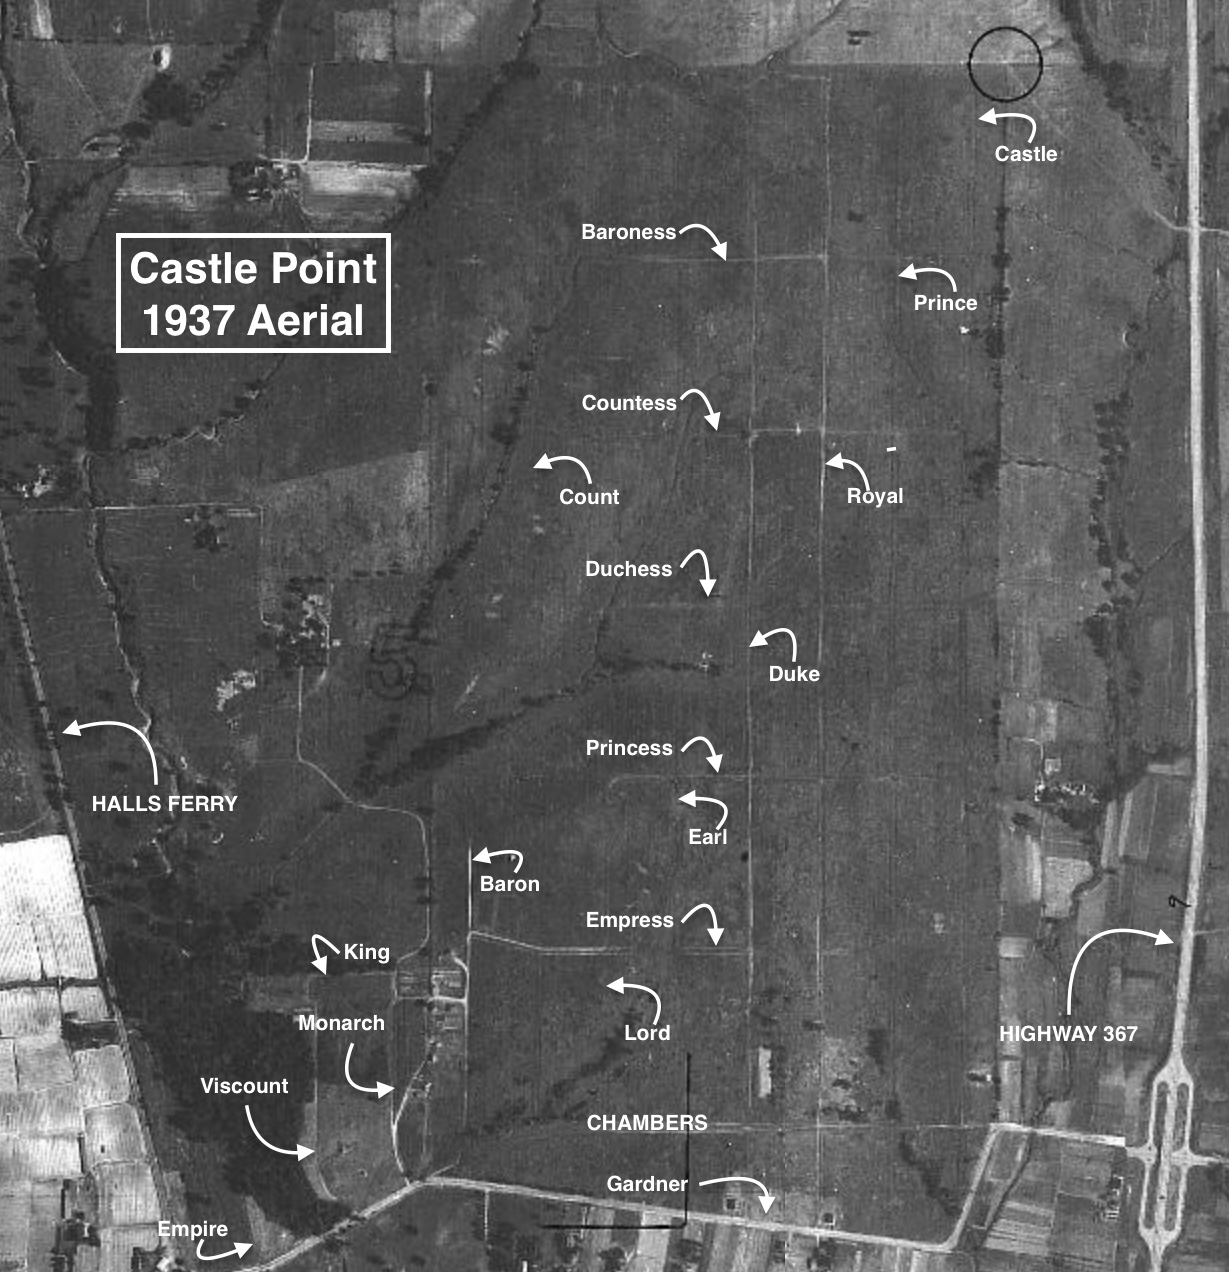 CASTLE POINT 1937 AERIAL